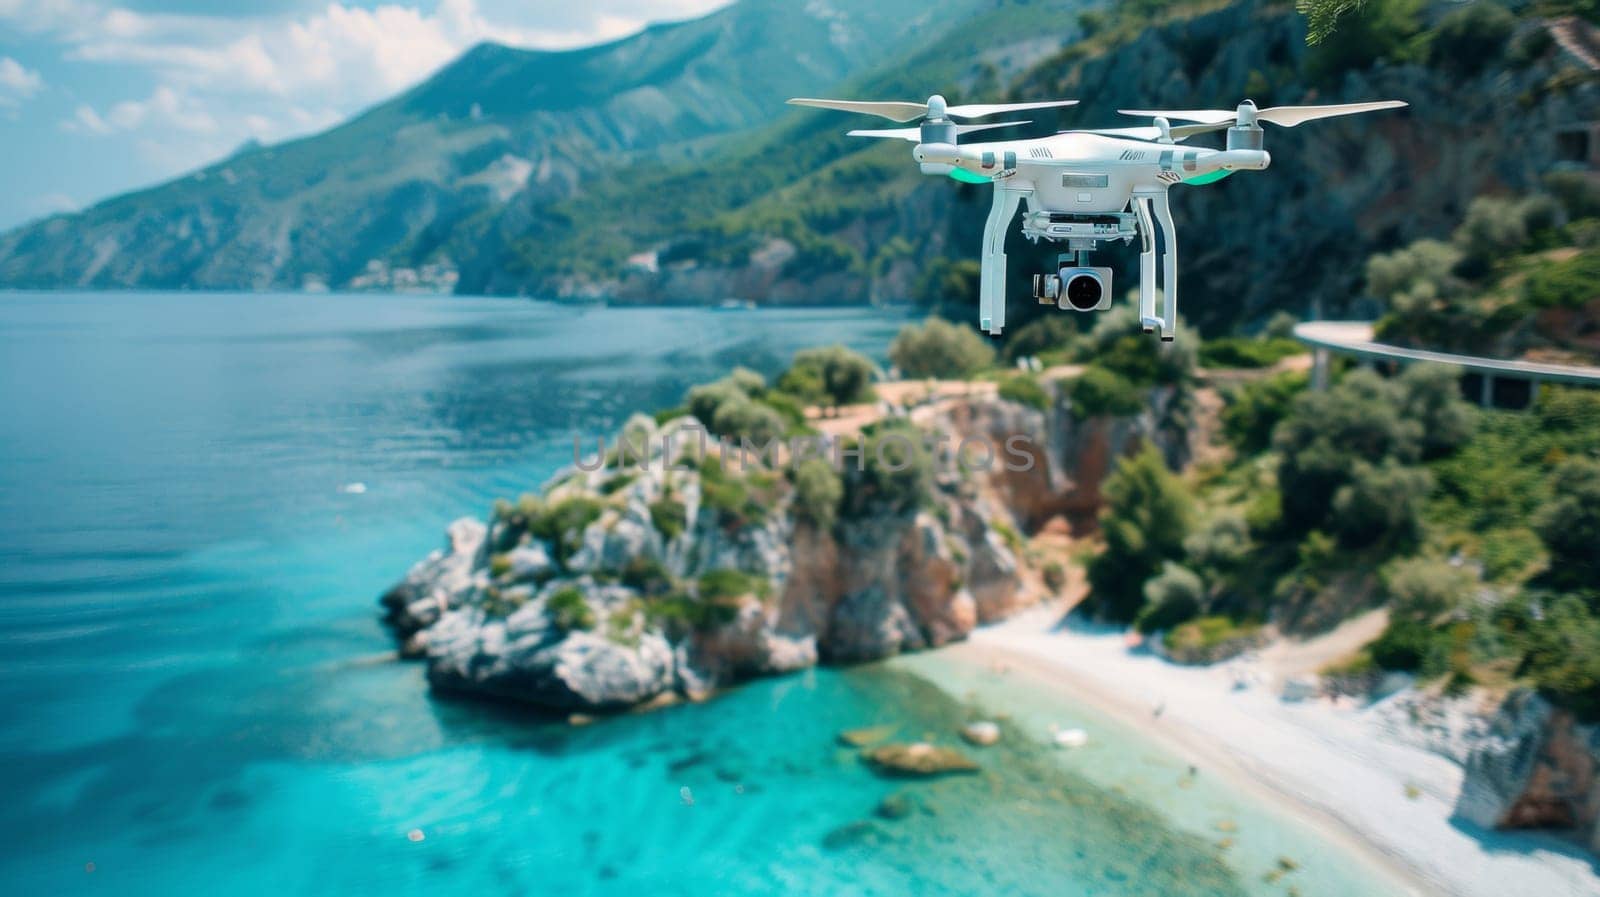 A drone flying over a beach and ocean with mountains in the background